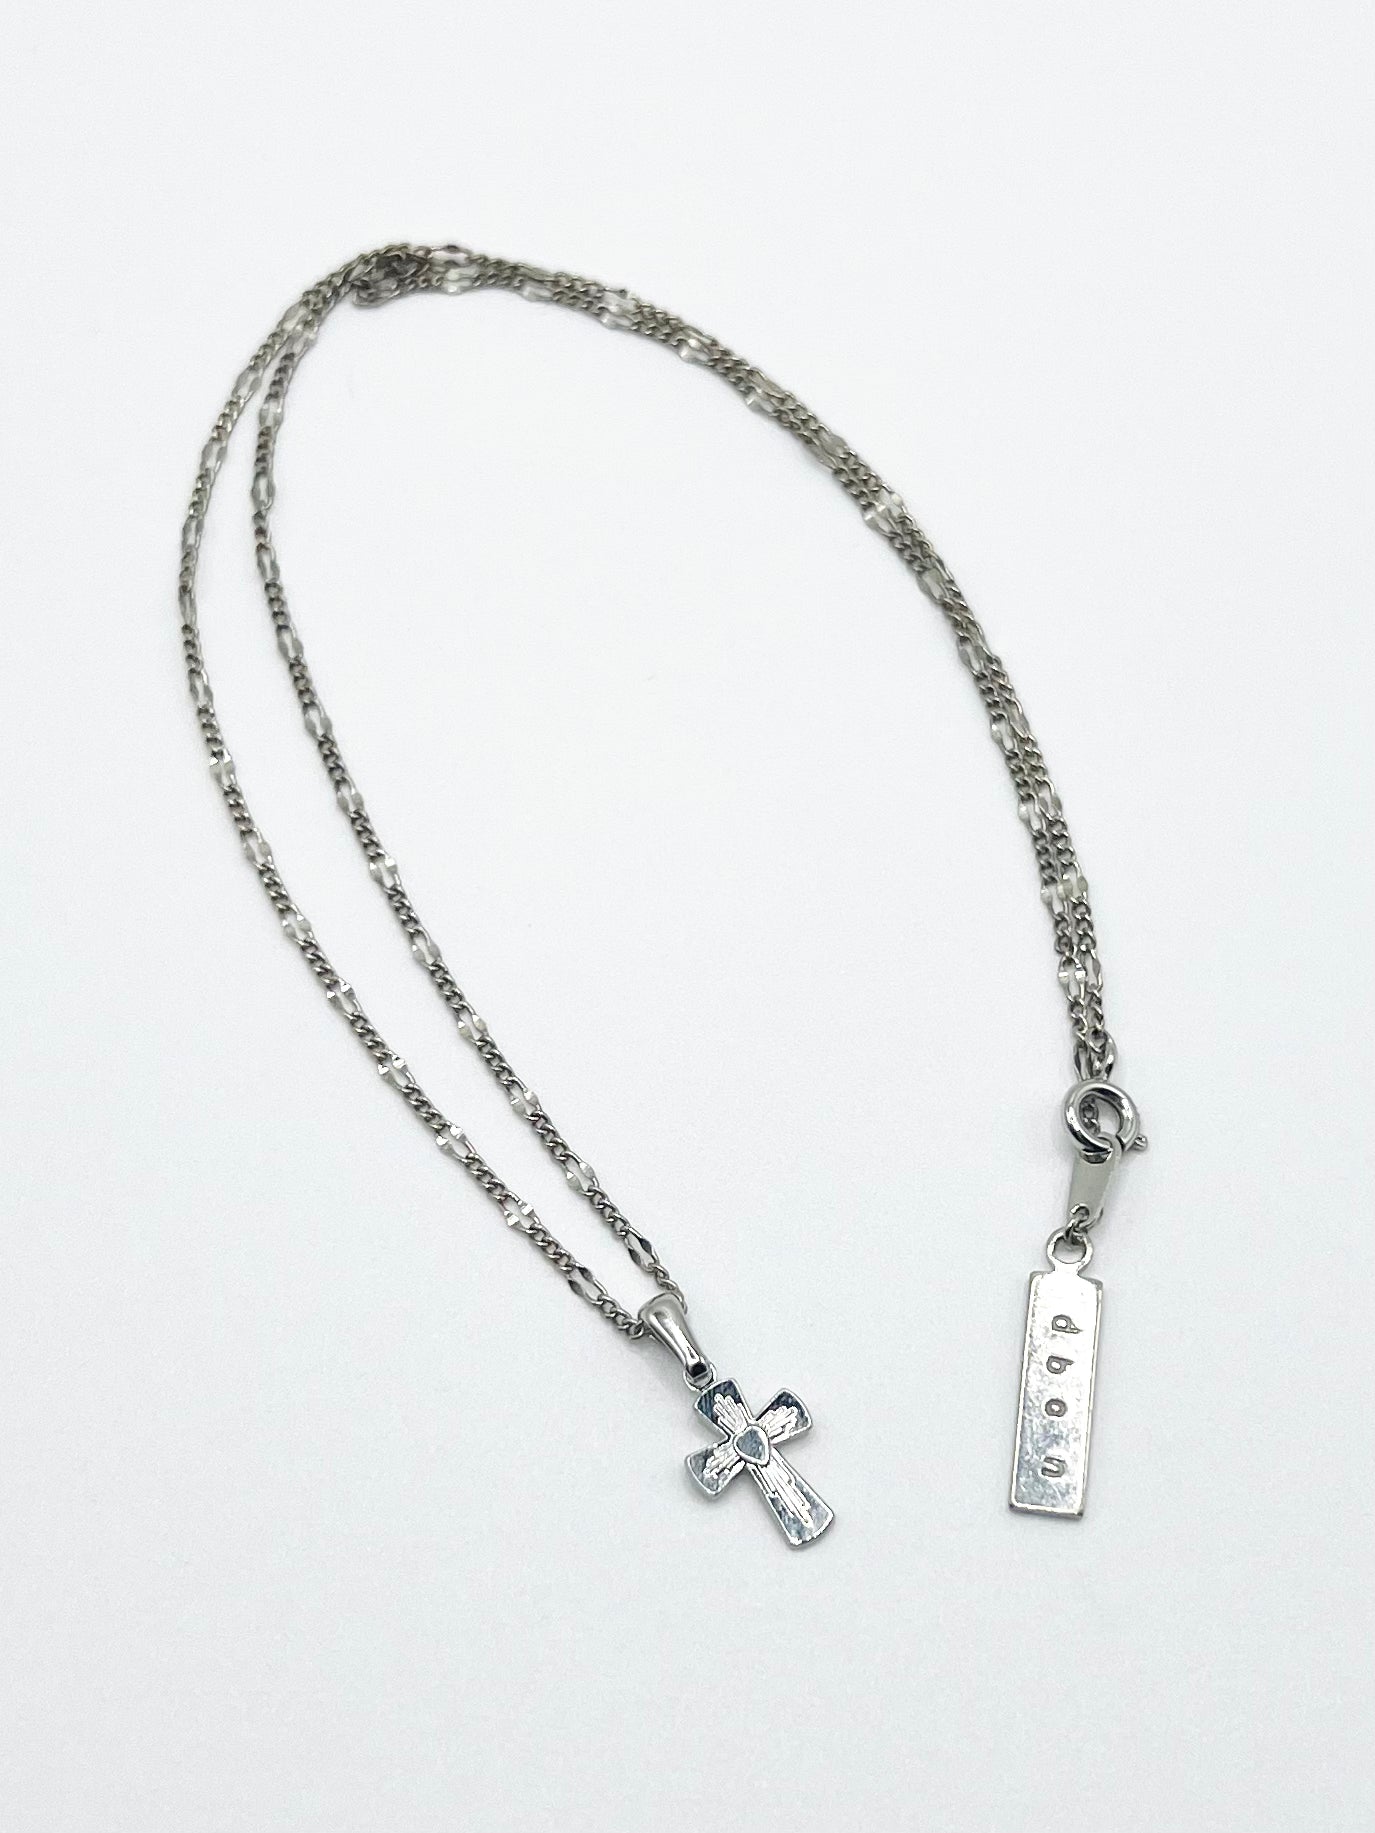 NW cross motif necklace - Silver